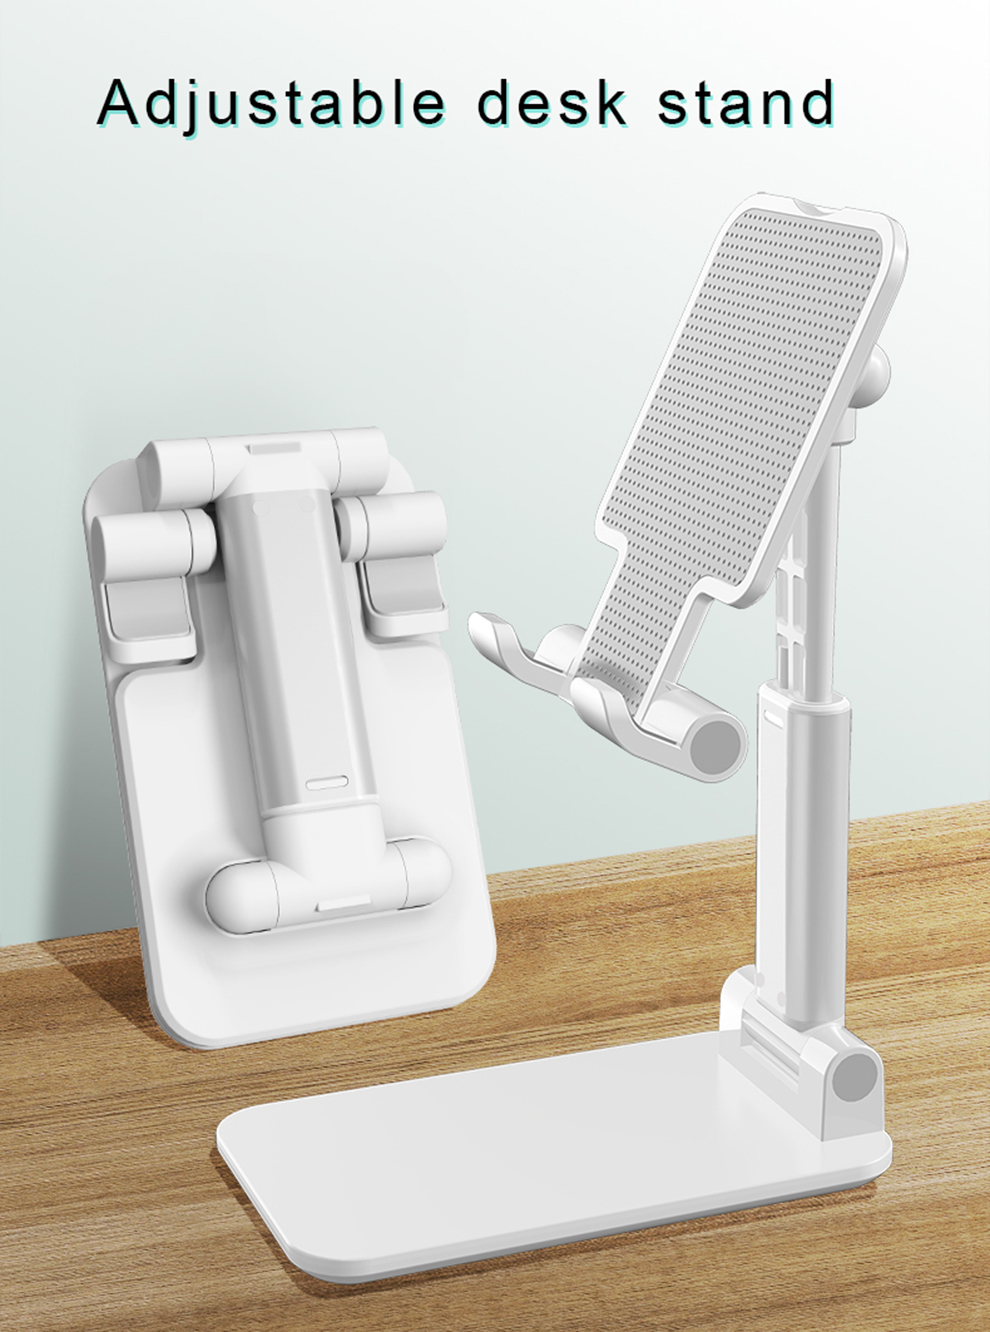 Bakeey-Foldable-Aluminum-Alloy-Desktop-Phone-Holder-Tablet-Stand-for-iPhone-or-Smart-Phones-40-79-in-1618652-4